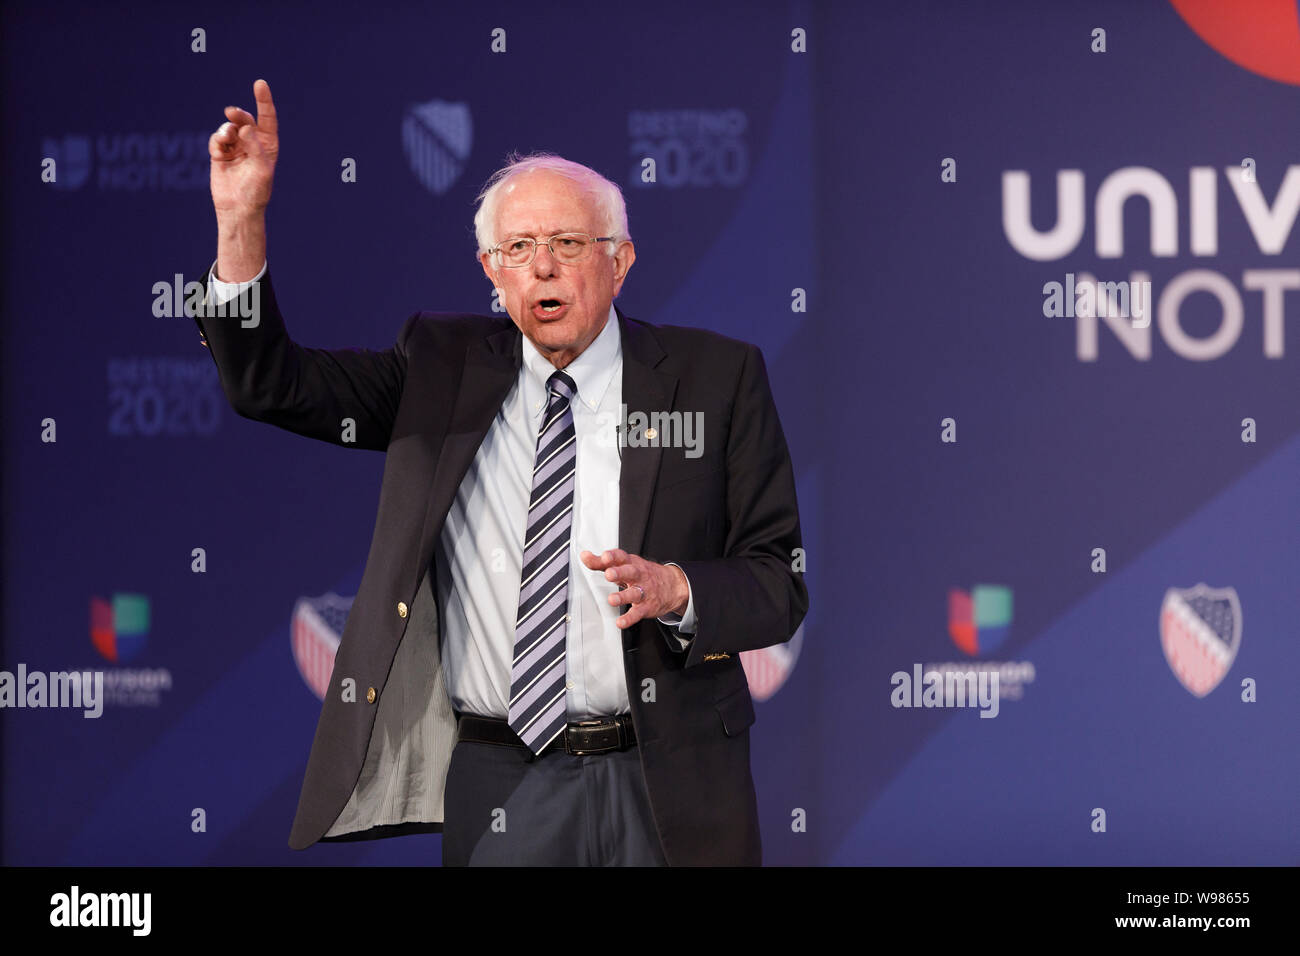 Senator Bernie Sanders, an independent from Vermont and 2020 presidential candidate, speaks during the League of United Latin American Citizens (LULAC Stock Photo